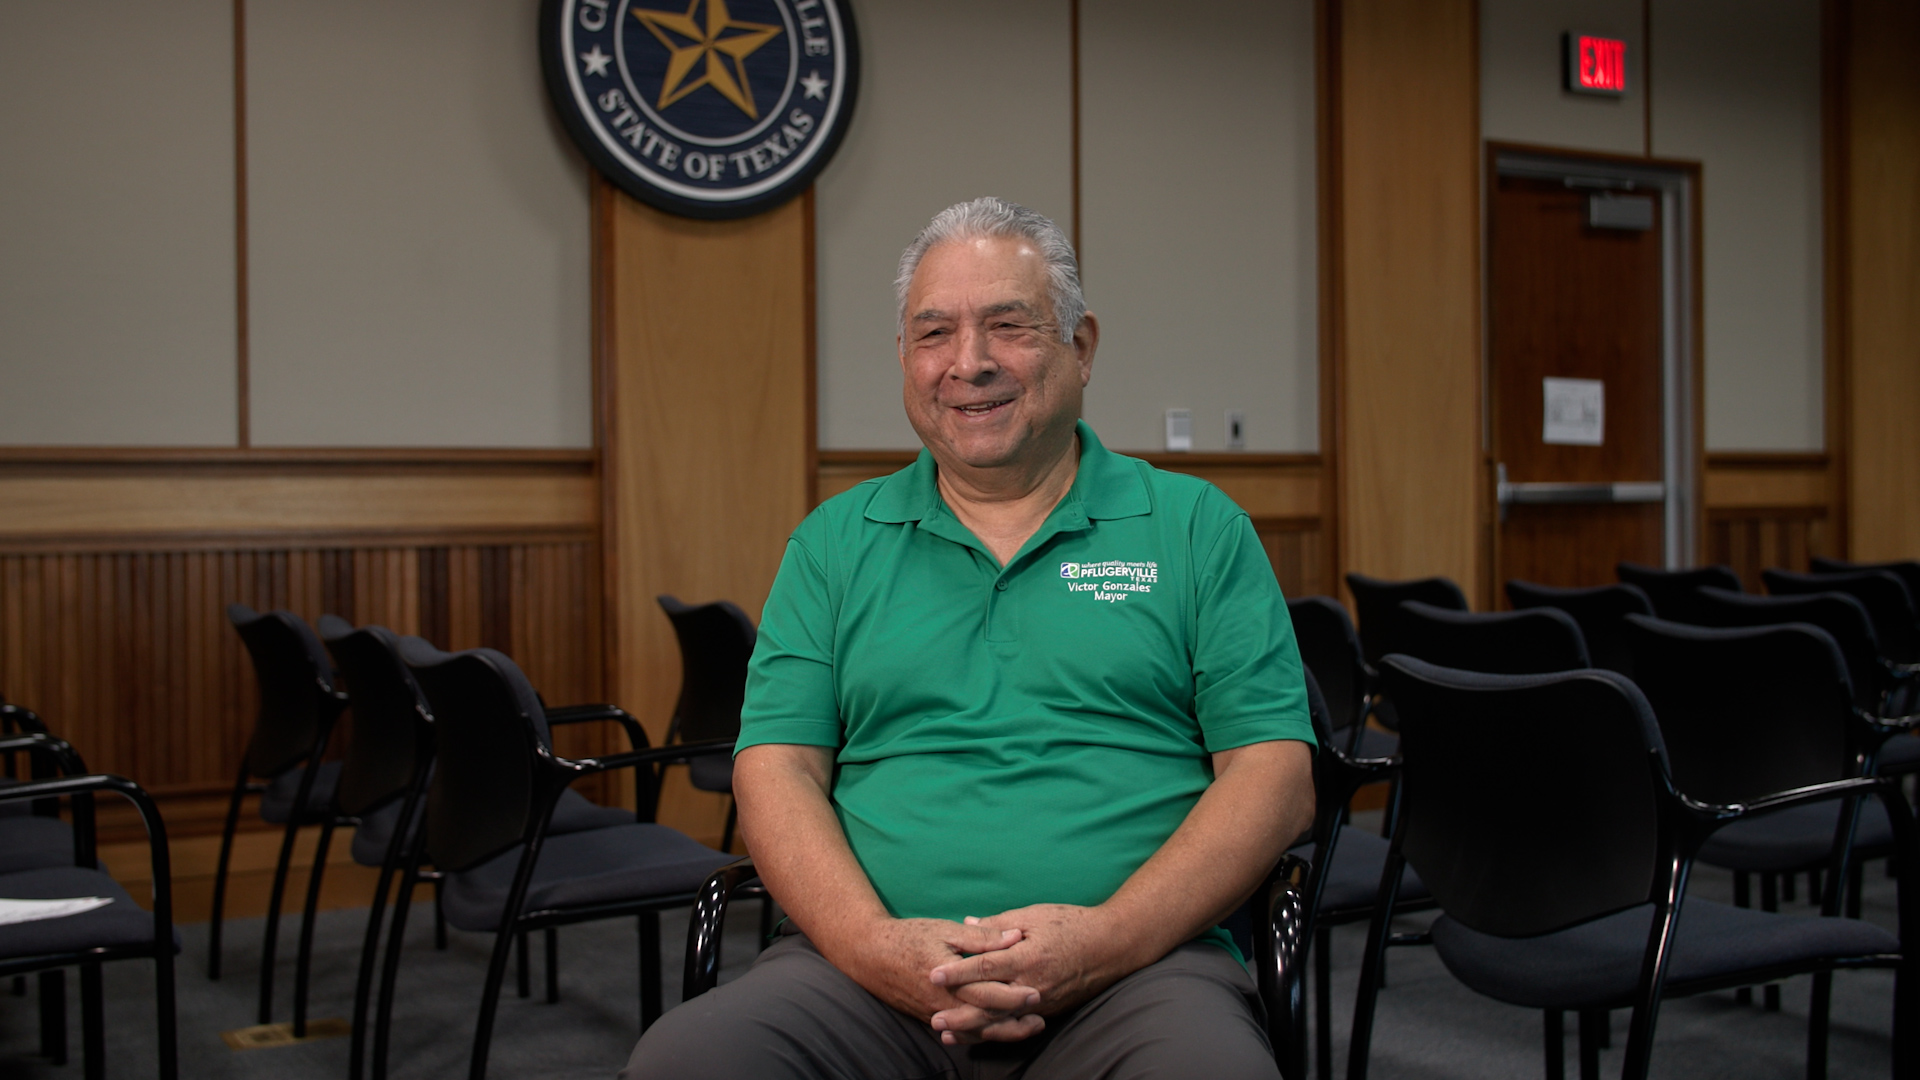 Pflugerville Mayor Victor Gonzales sits down for an interview with the Decibel team. He is running unopposed in Pflugerville’s mayoral race and will serve a third and final term as mayor.